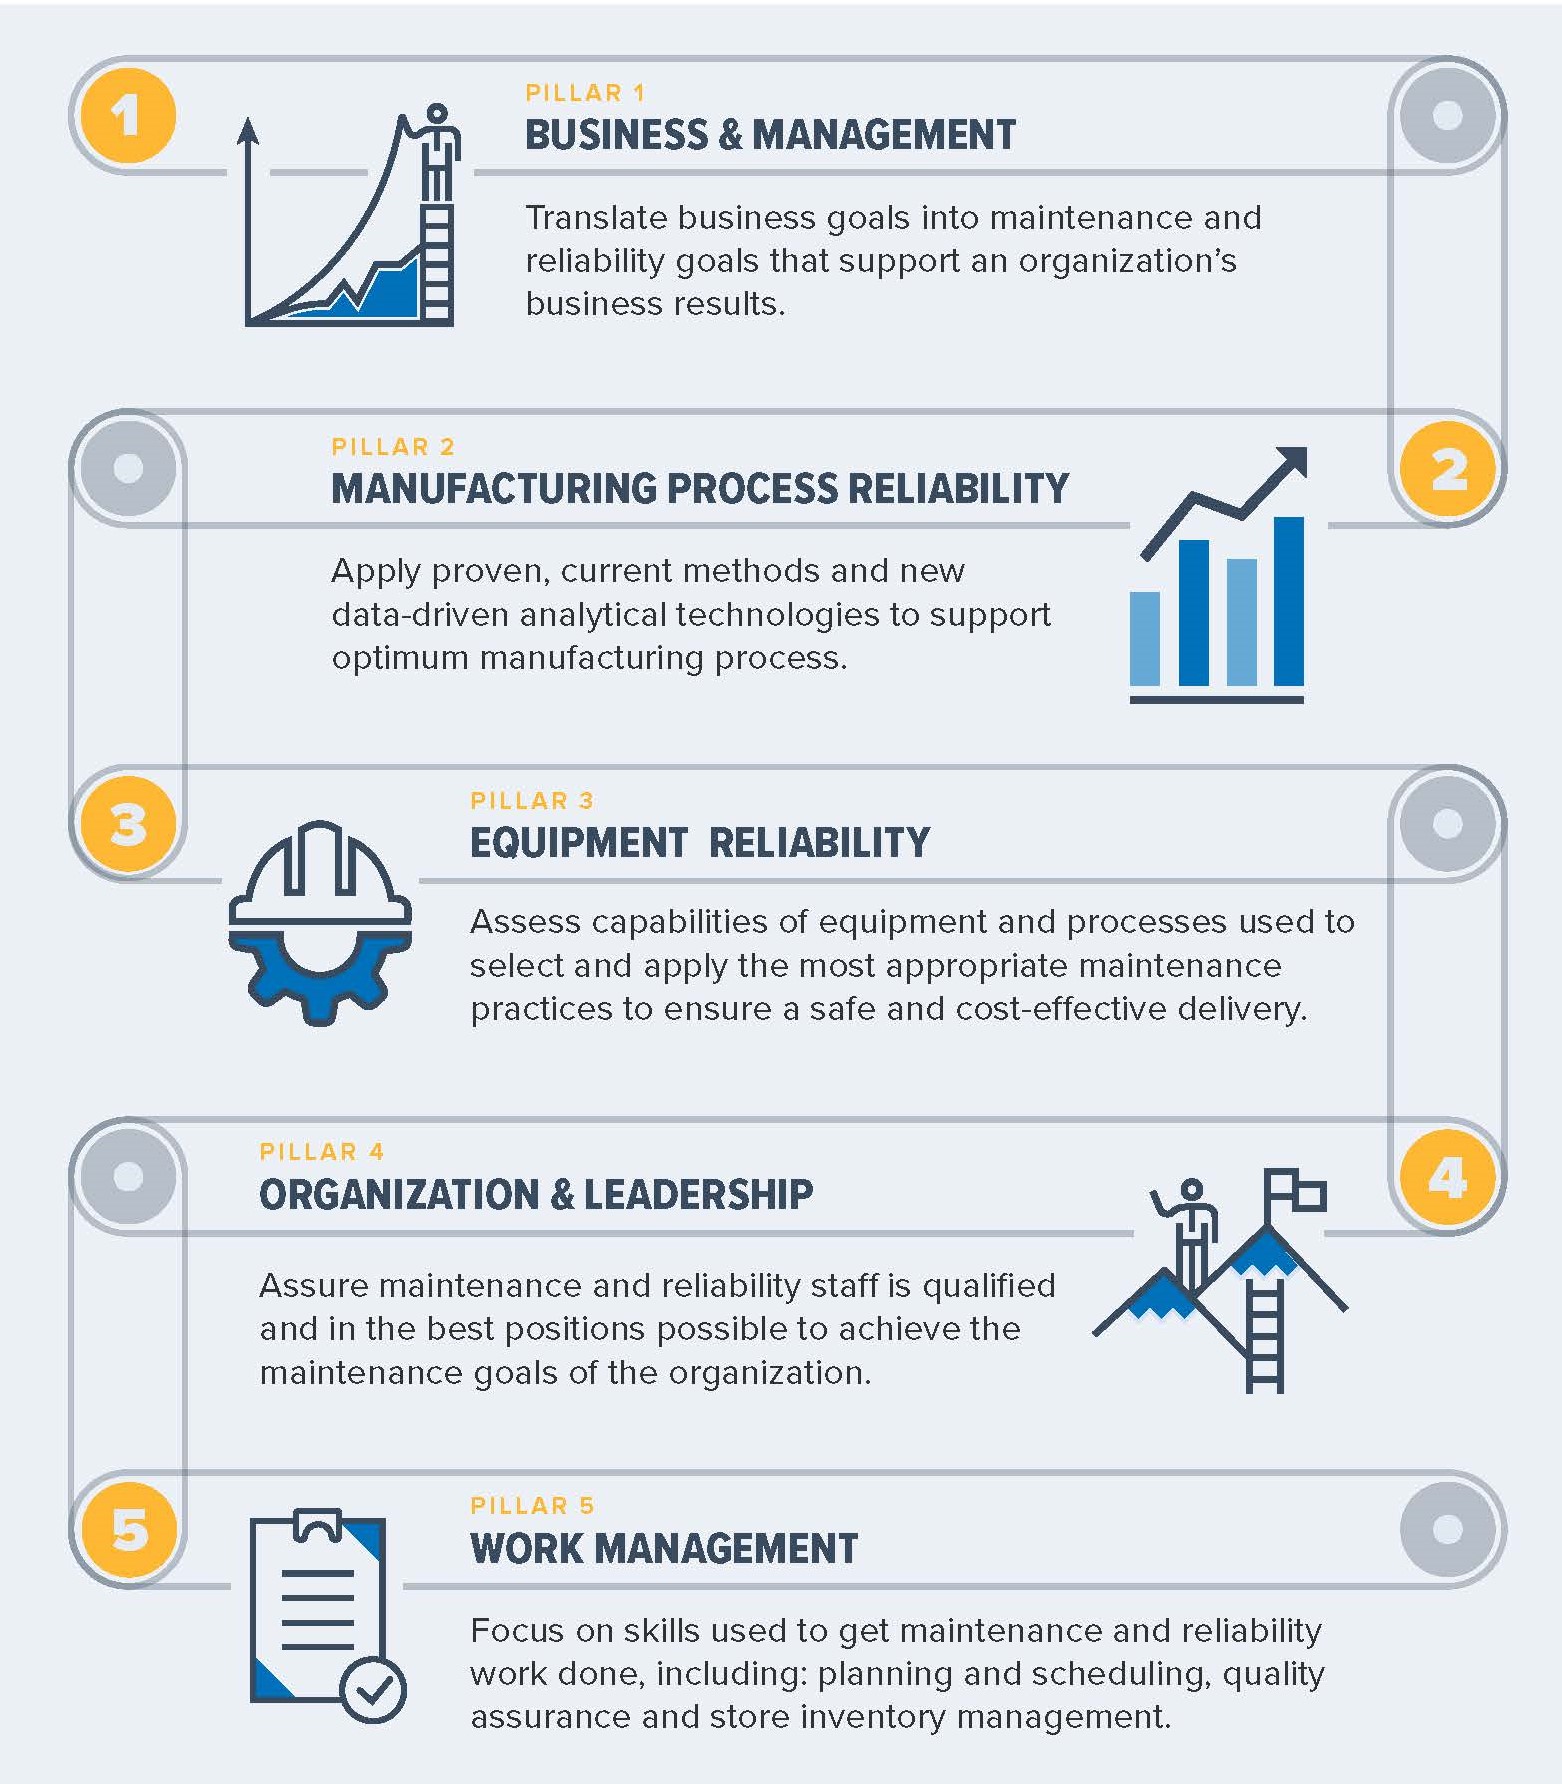 1. Technical and managerial pillars in World Class Manufacturing